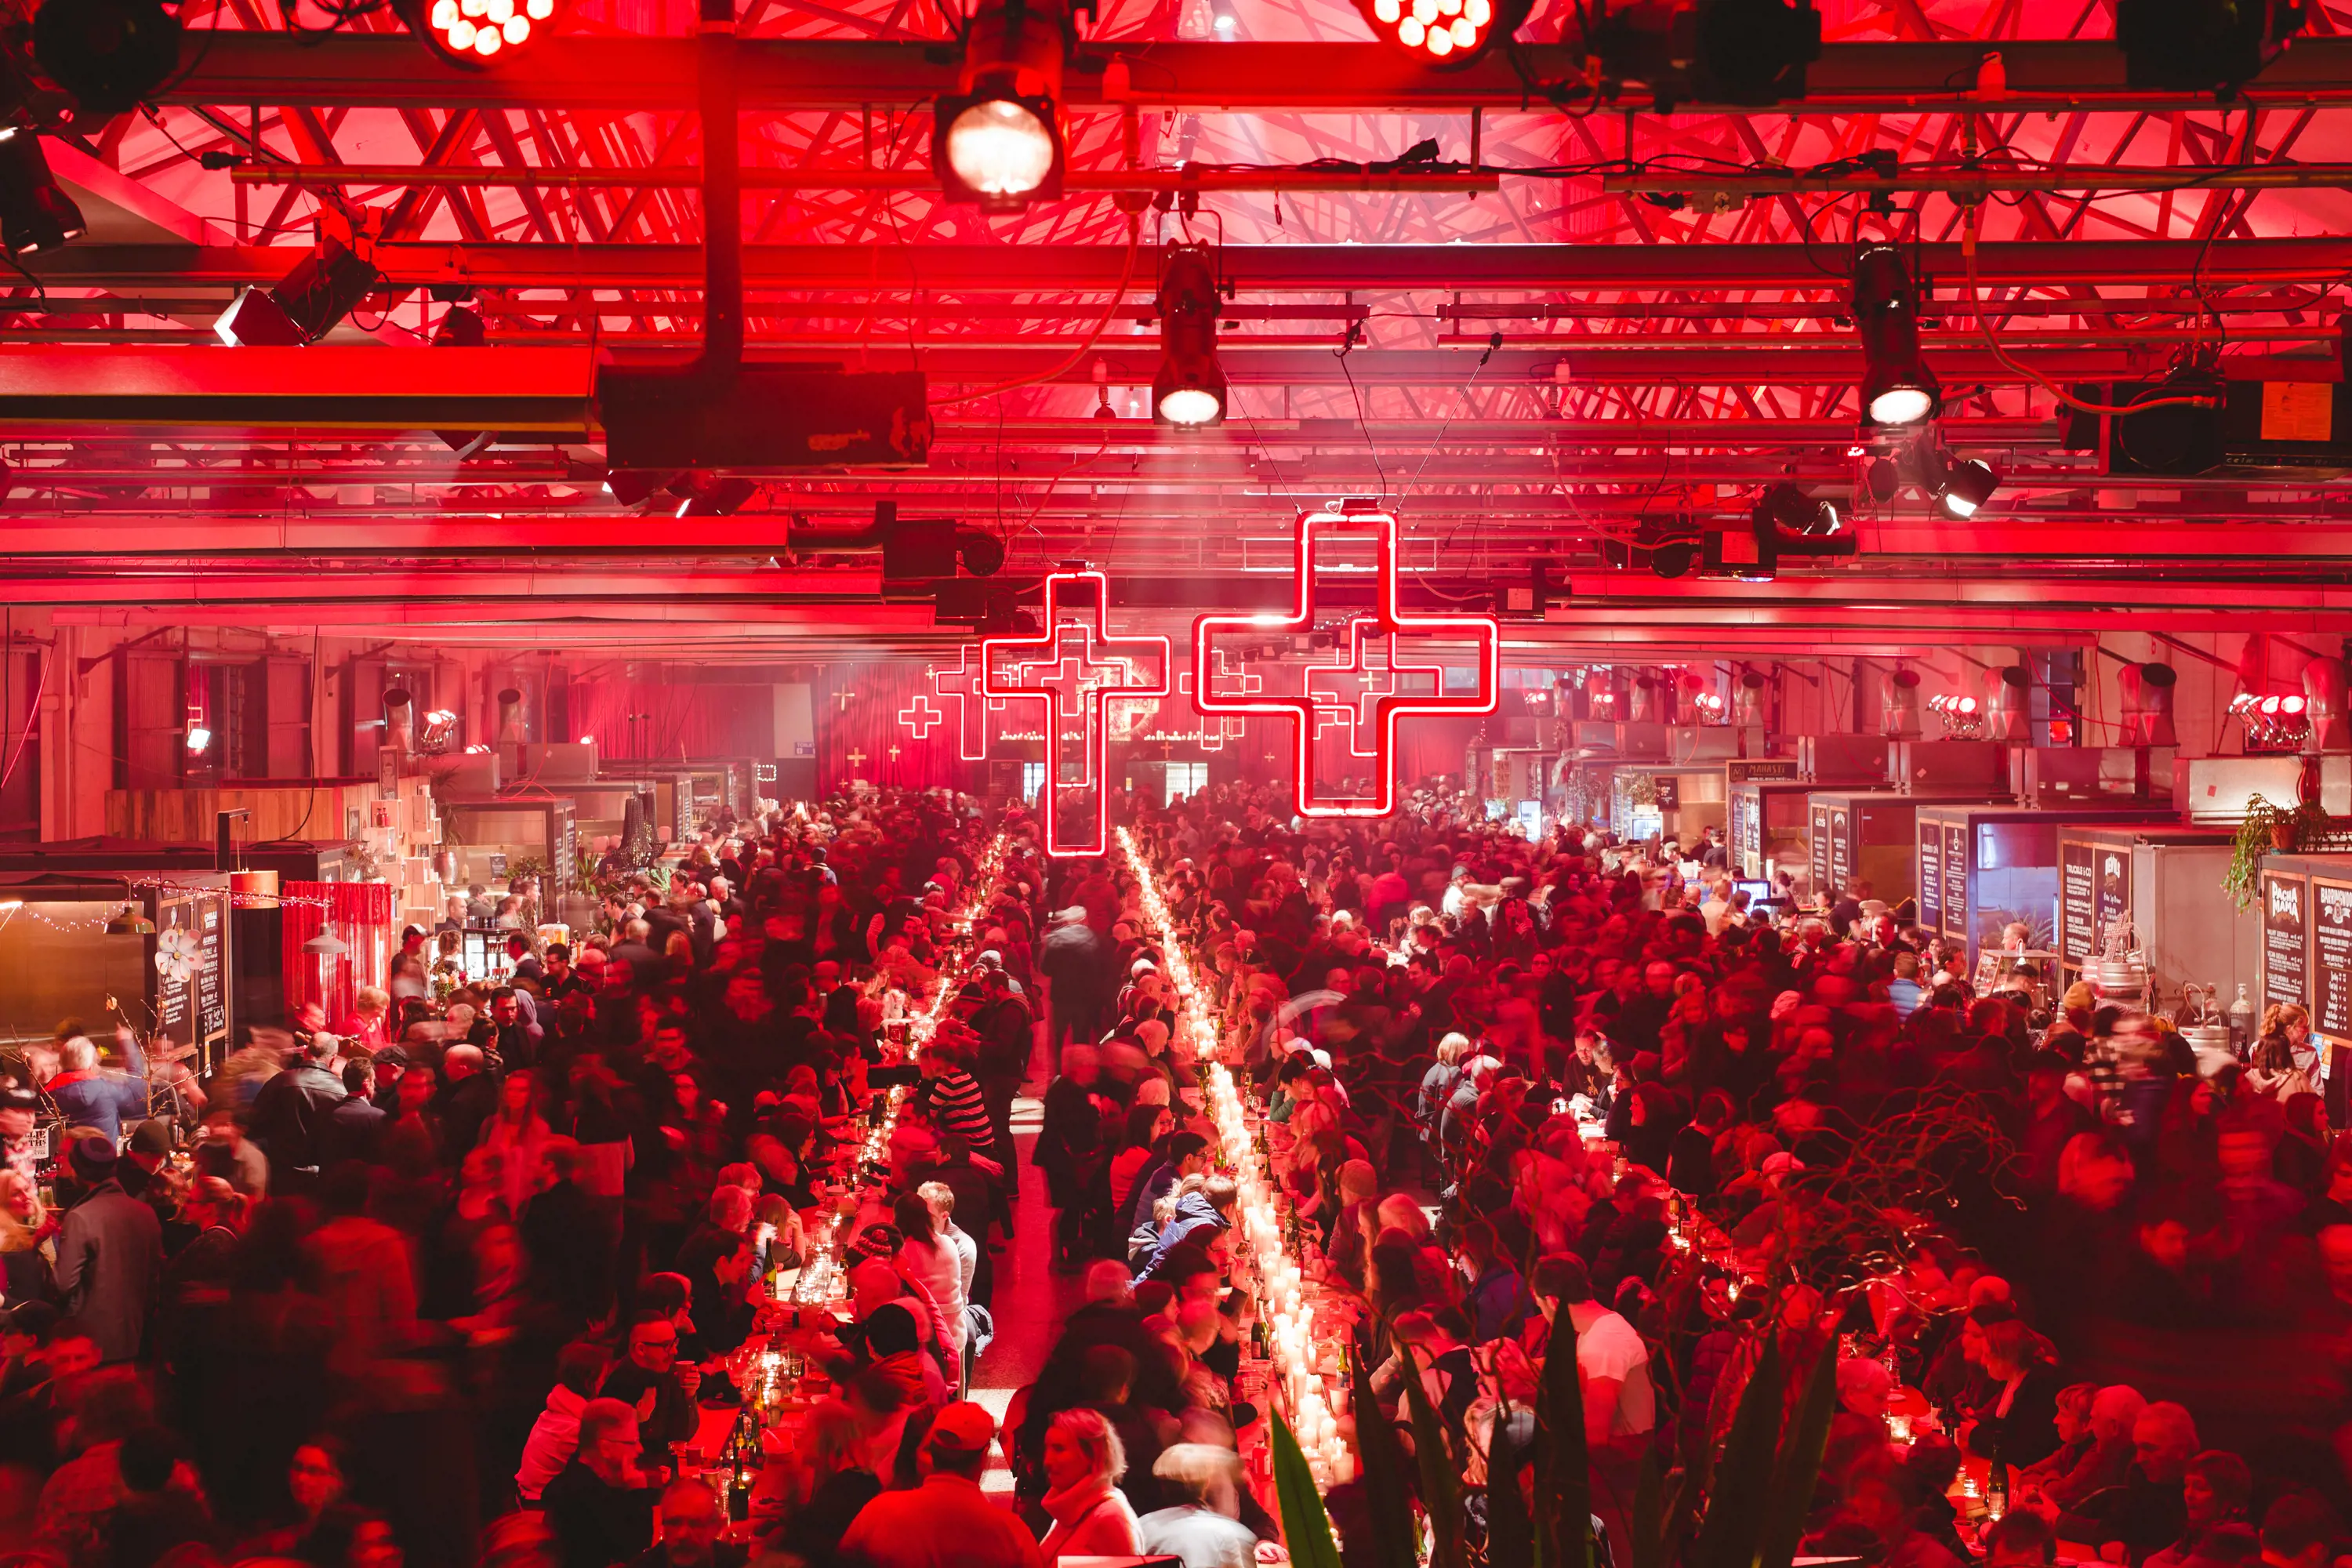 a large dock shed with high ceilings converted into a dinning hall with red lighting and thousands of people sitting at long tables.